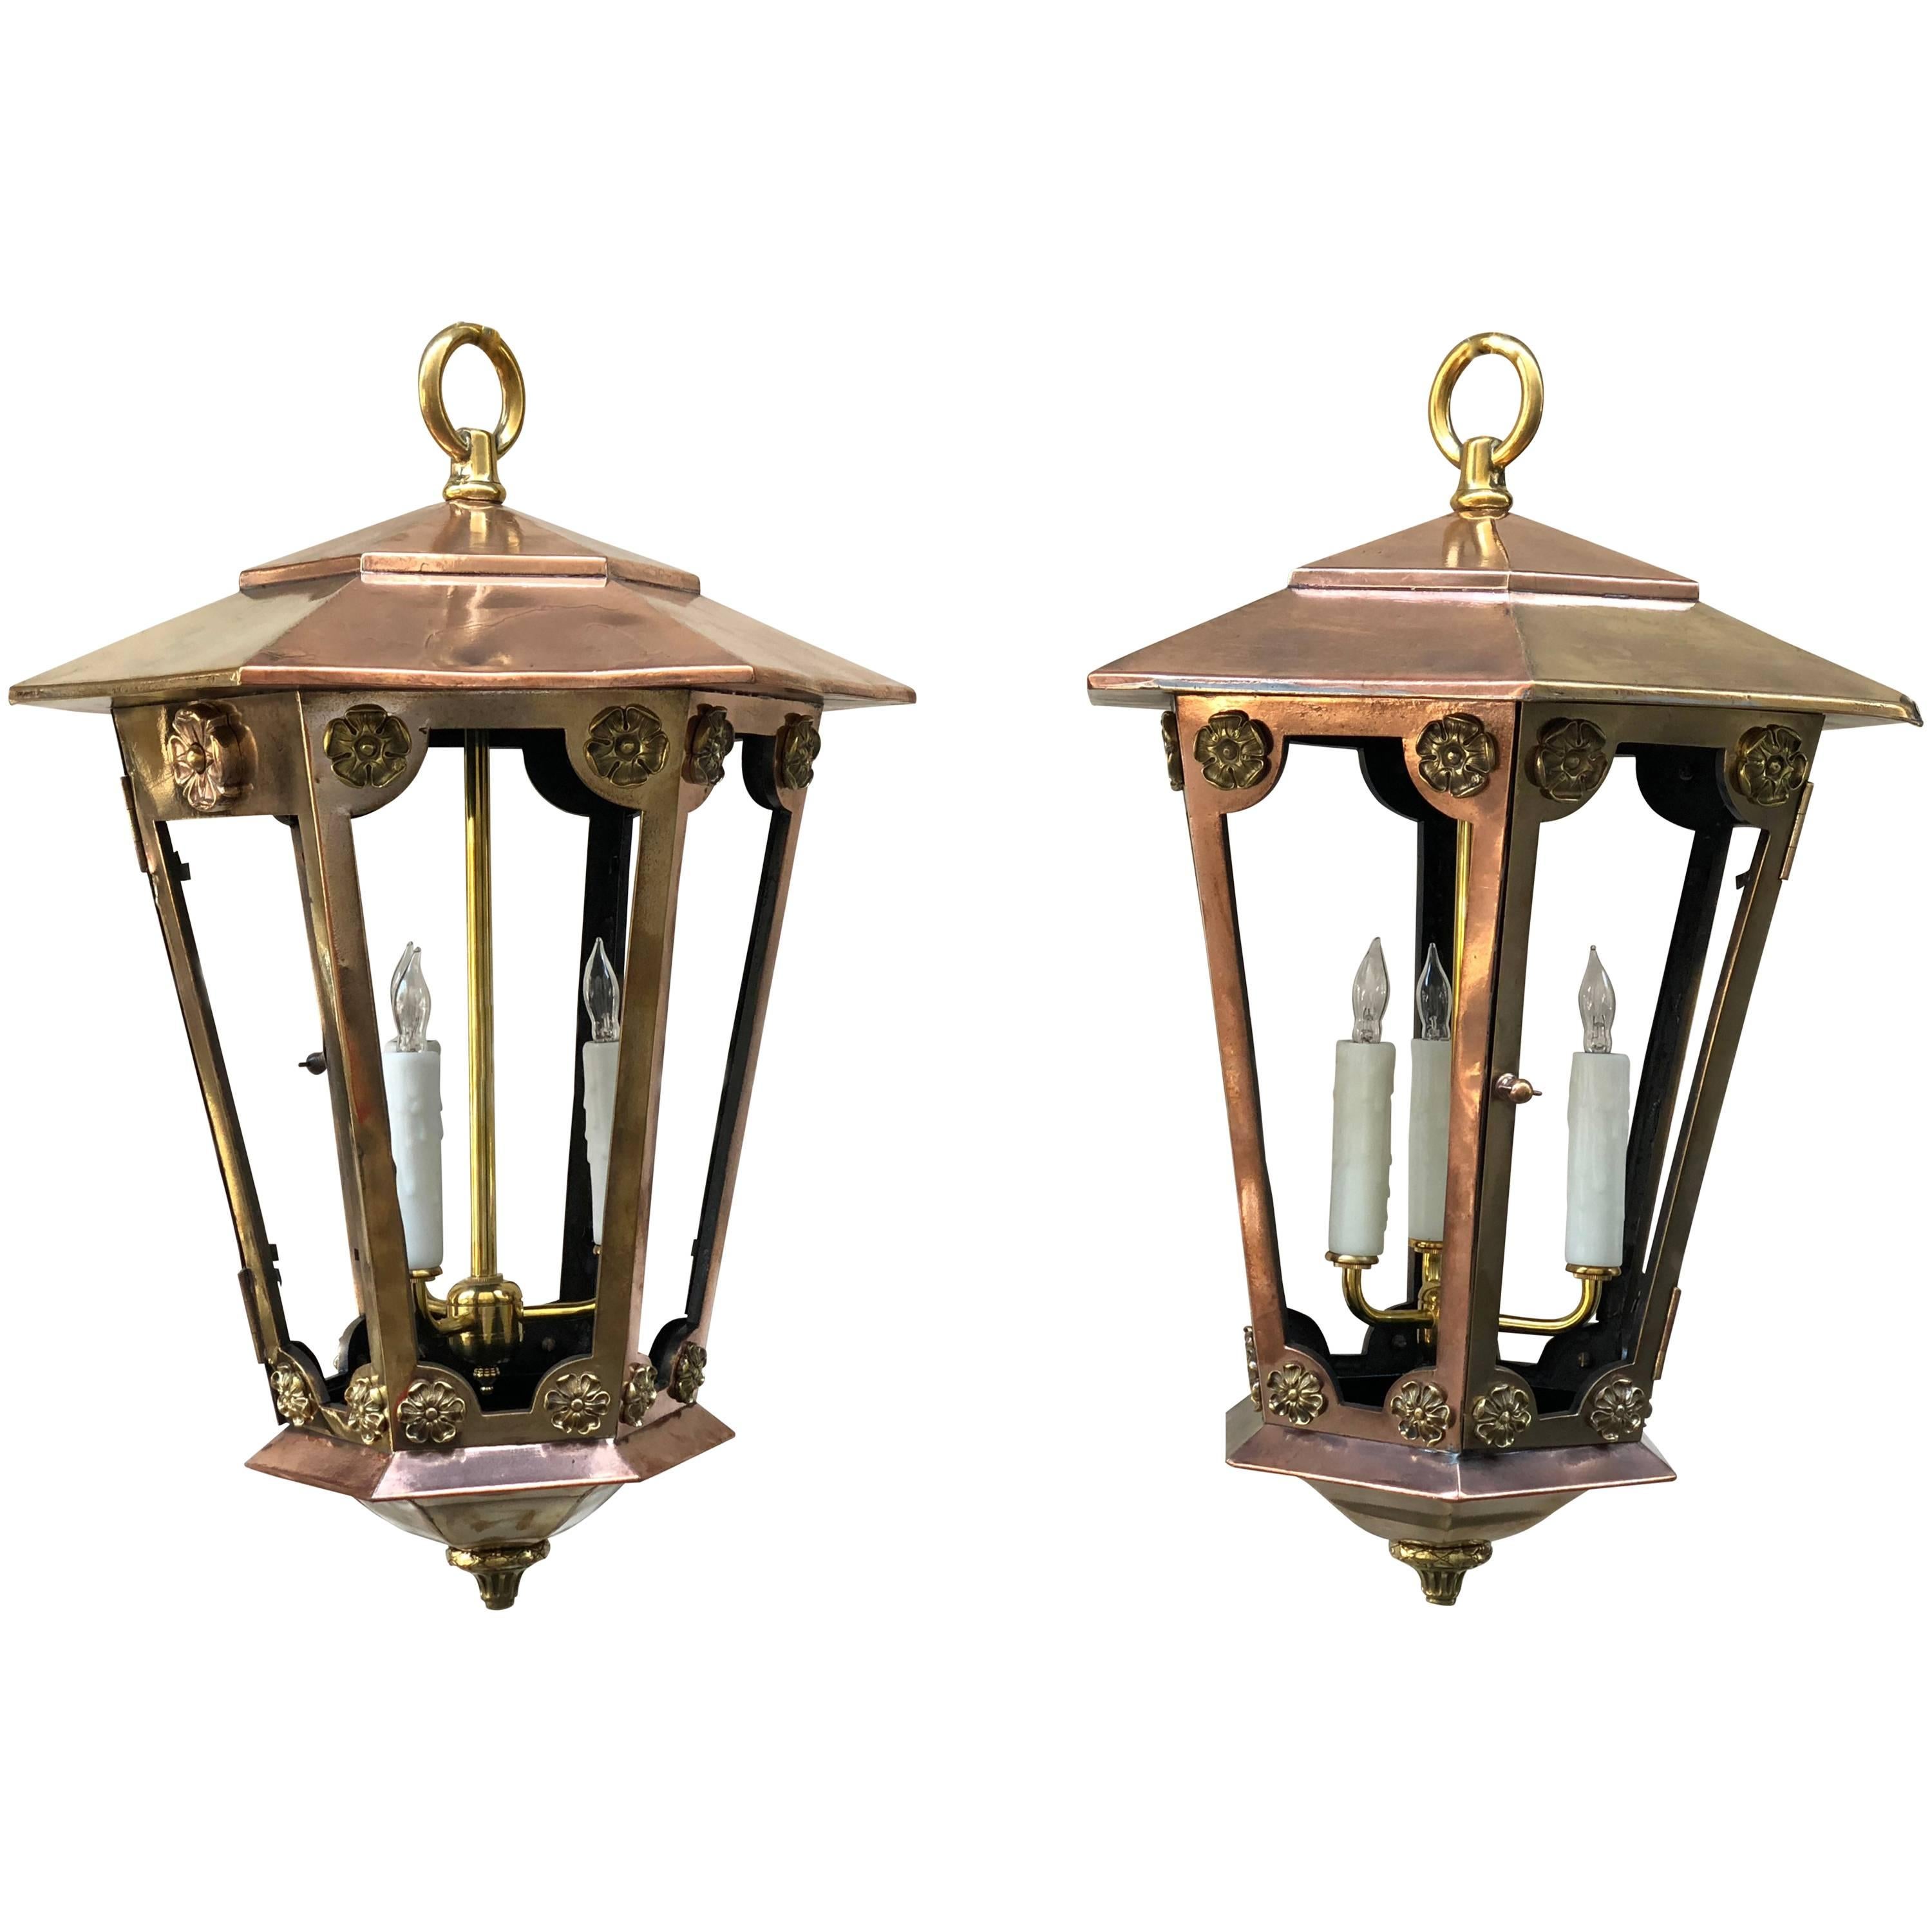 Pair of Late 19th Century New York Copper and Brass Gas Lanterns